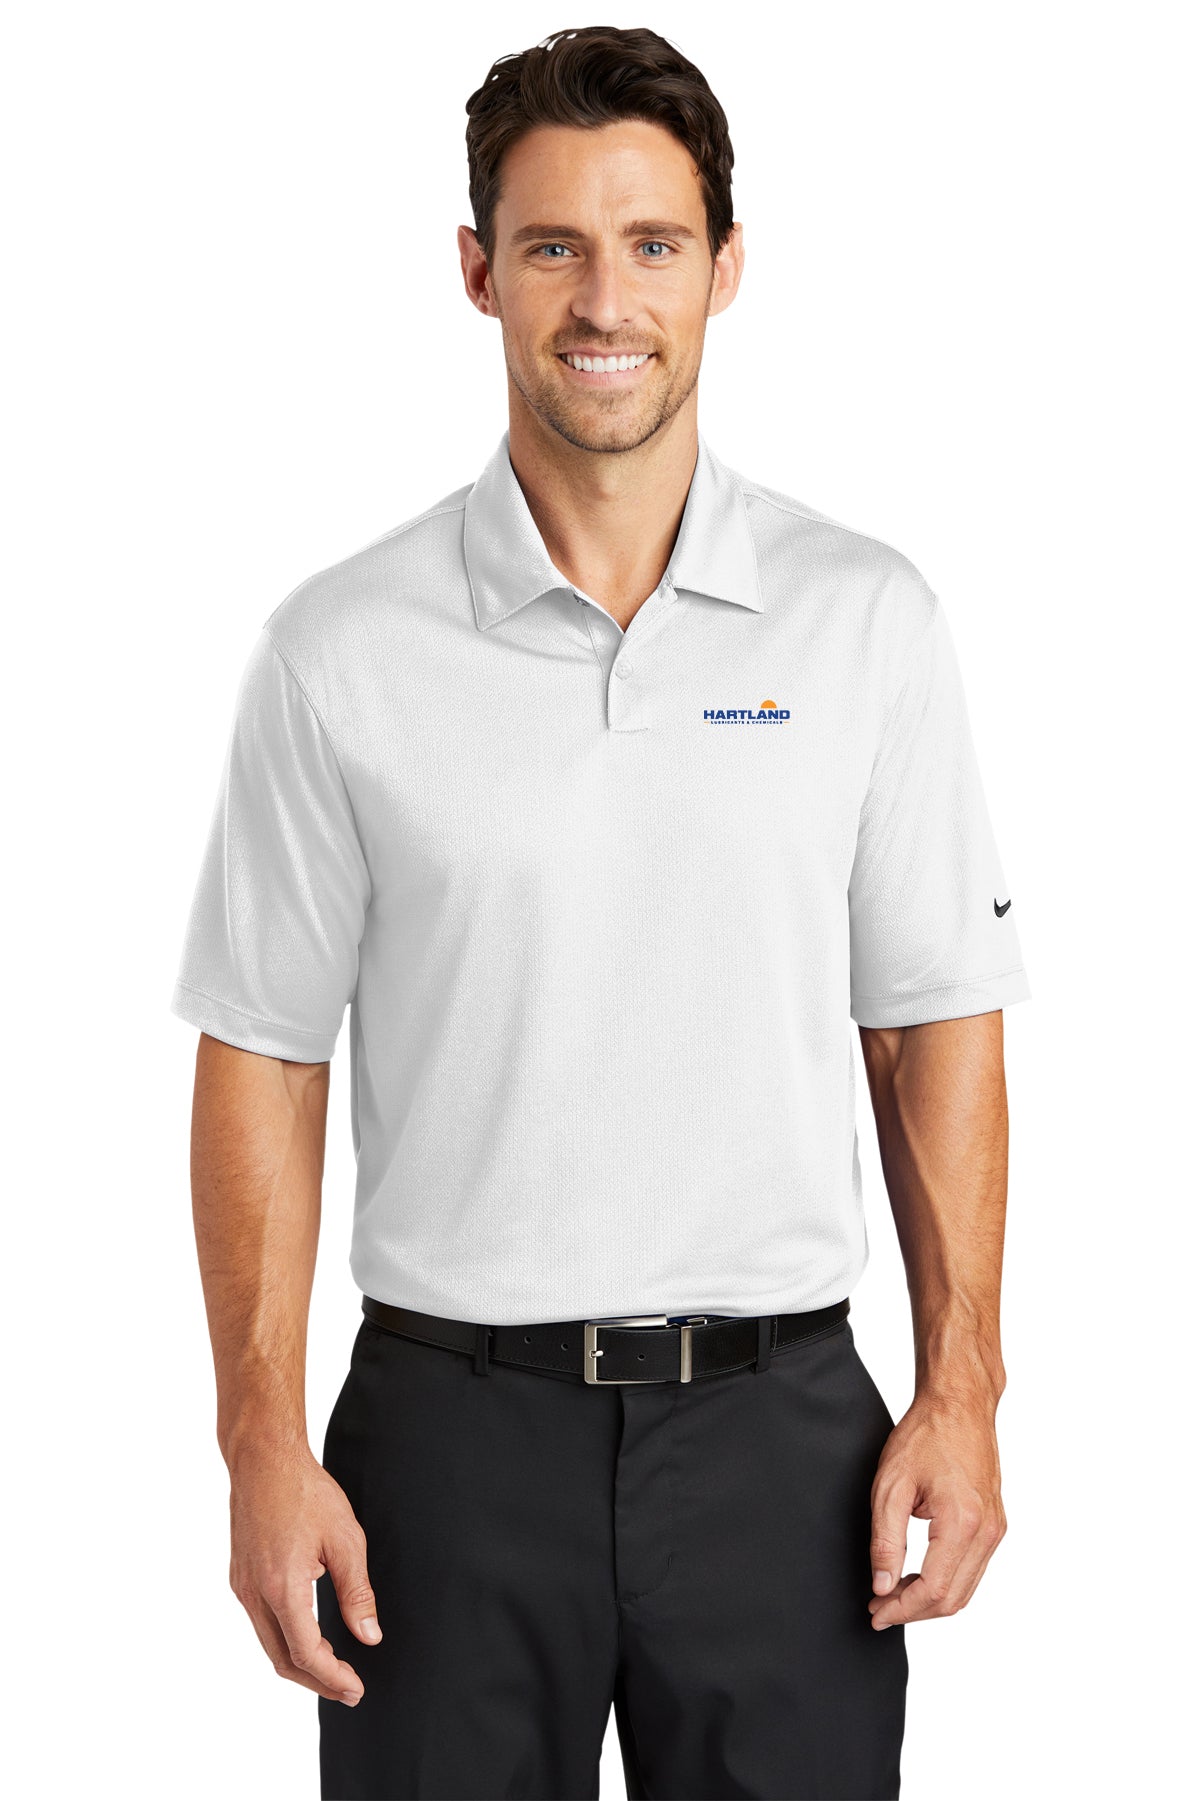 Hartland Lubricants and Chemicals Nike Dri-fit Polo